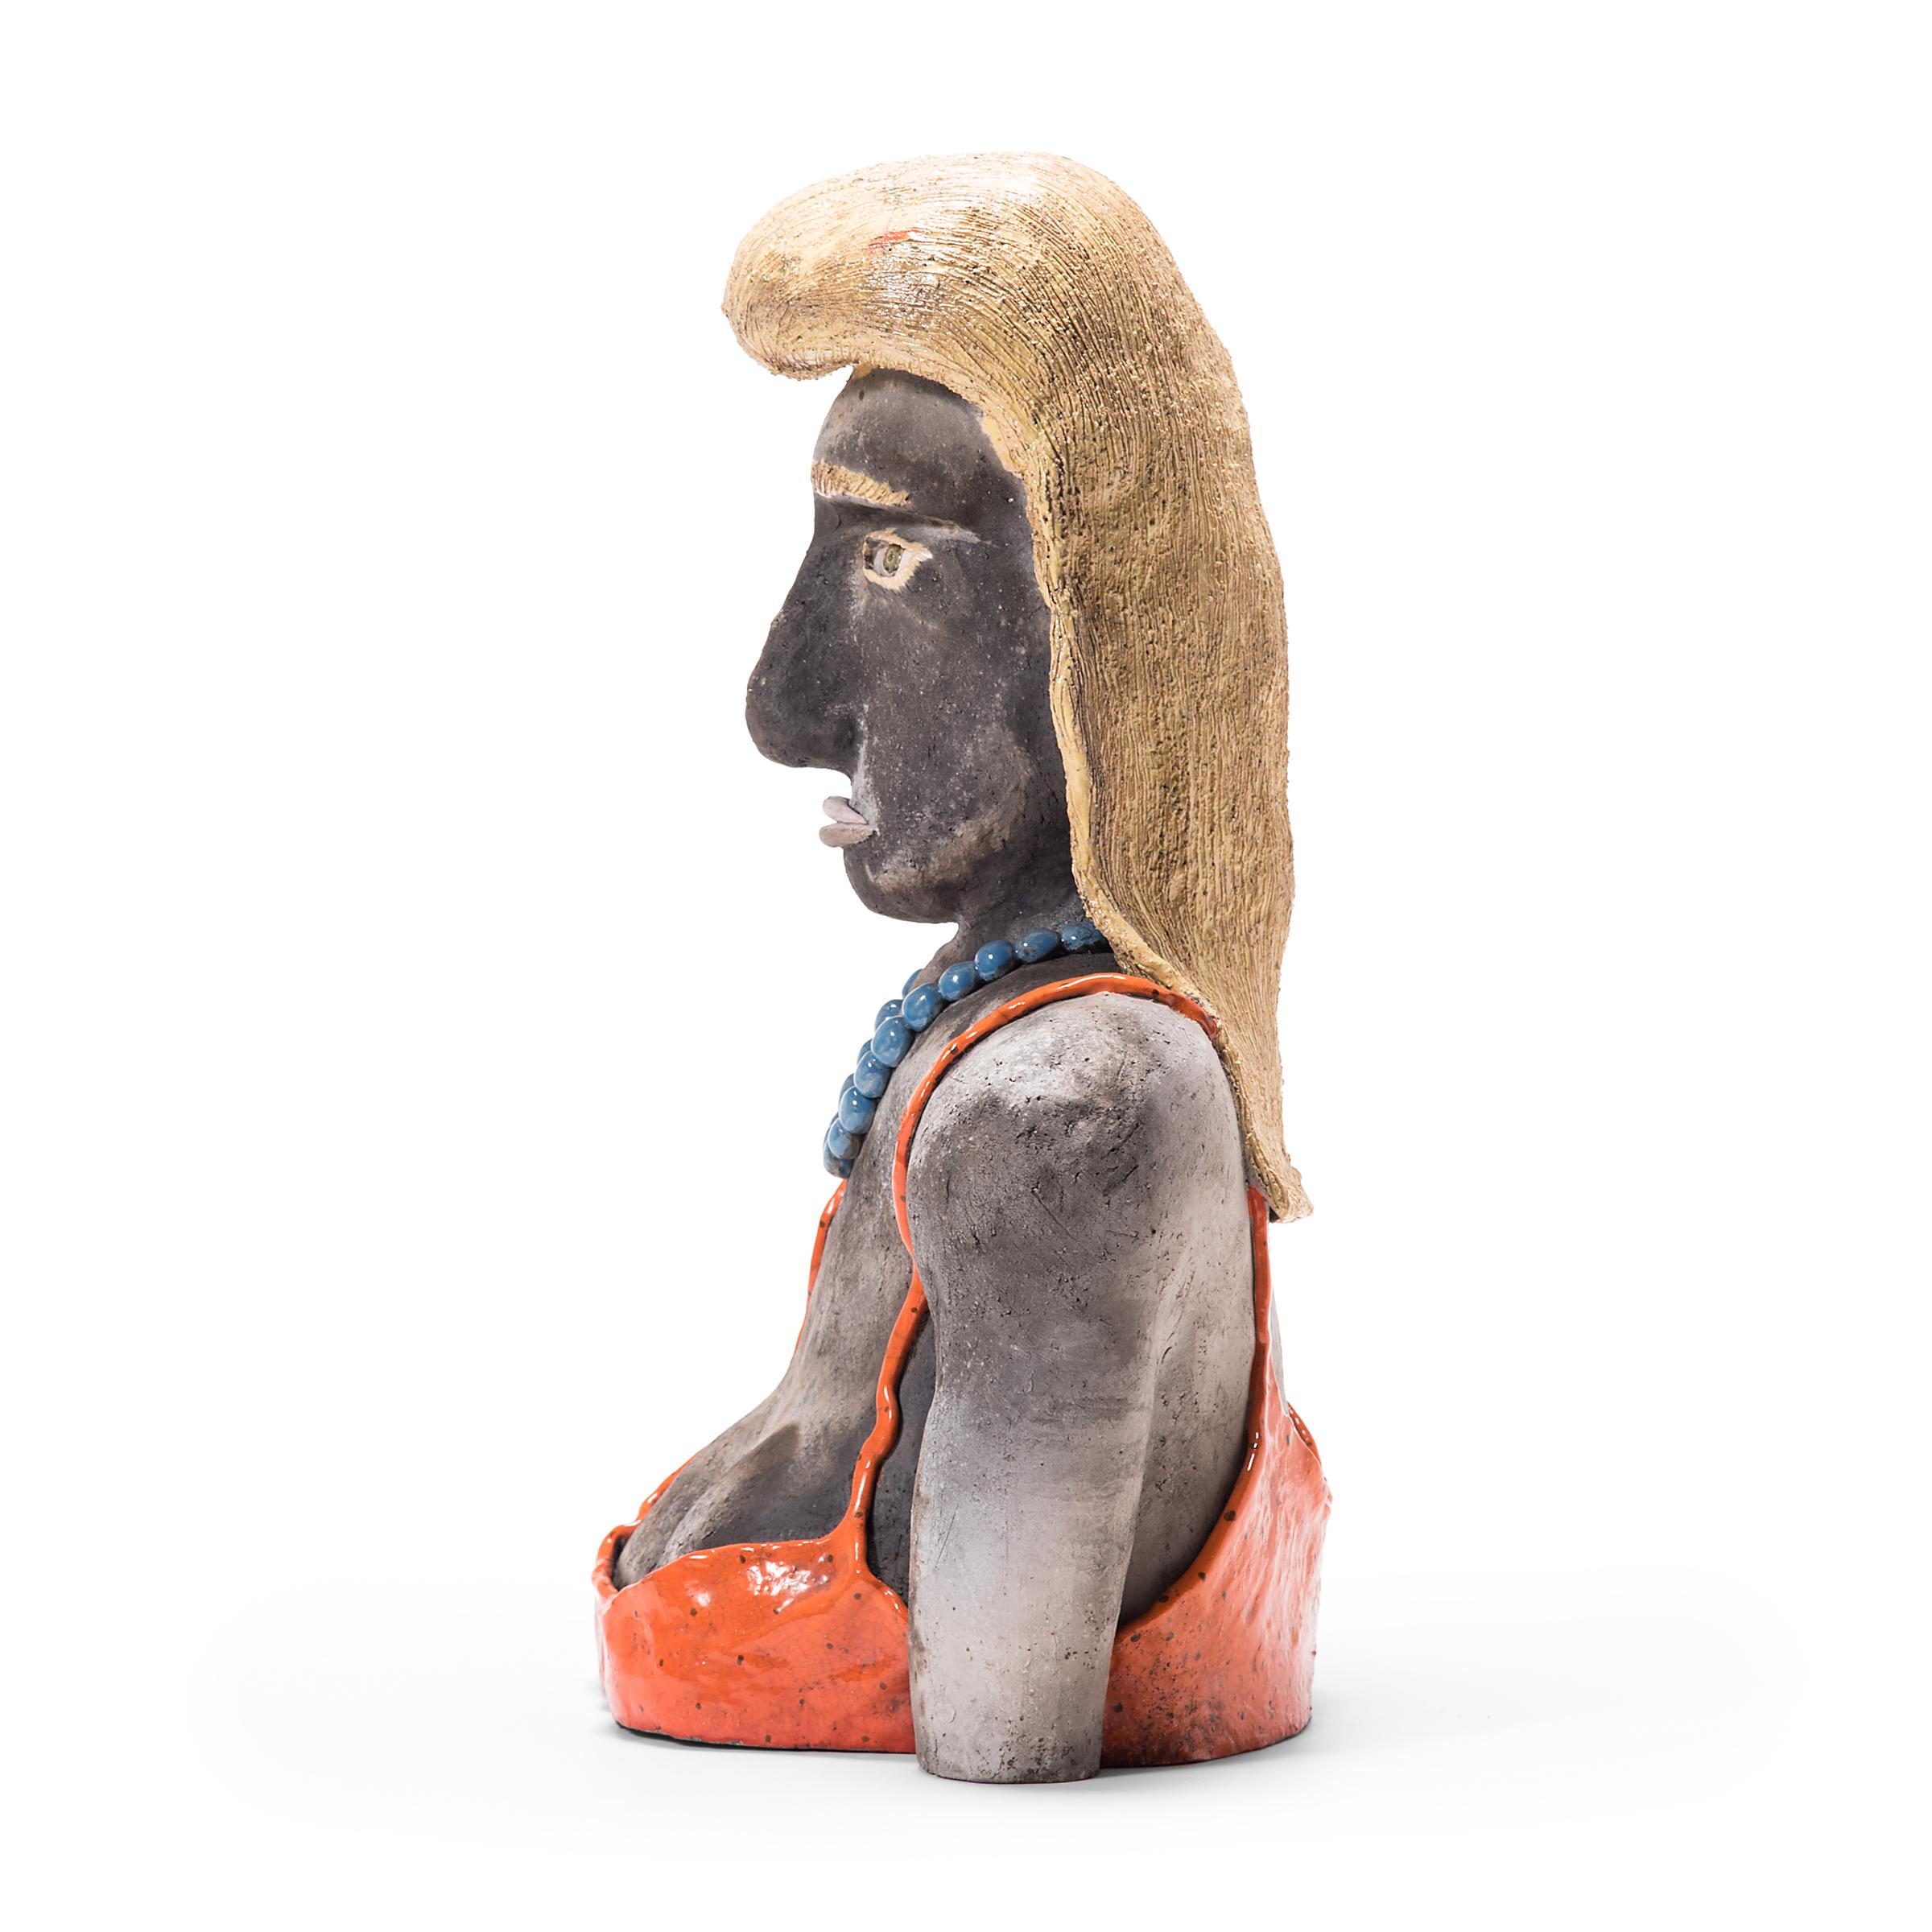 Although this whimsical sculpture by Allan Winkler has the look of outsider art, this ceramic work stems from the art school-trained artist’s interest in the Chicago Imagists. This group of artists added an urban twist to their surreal works by